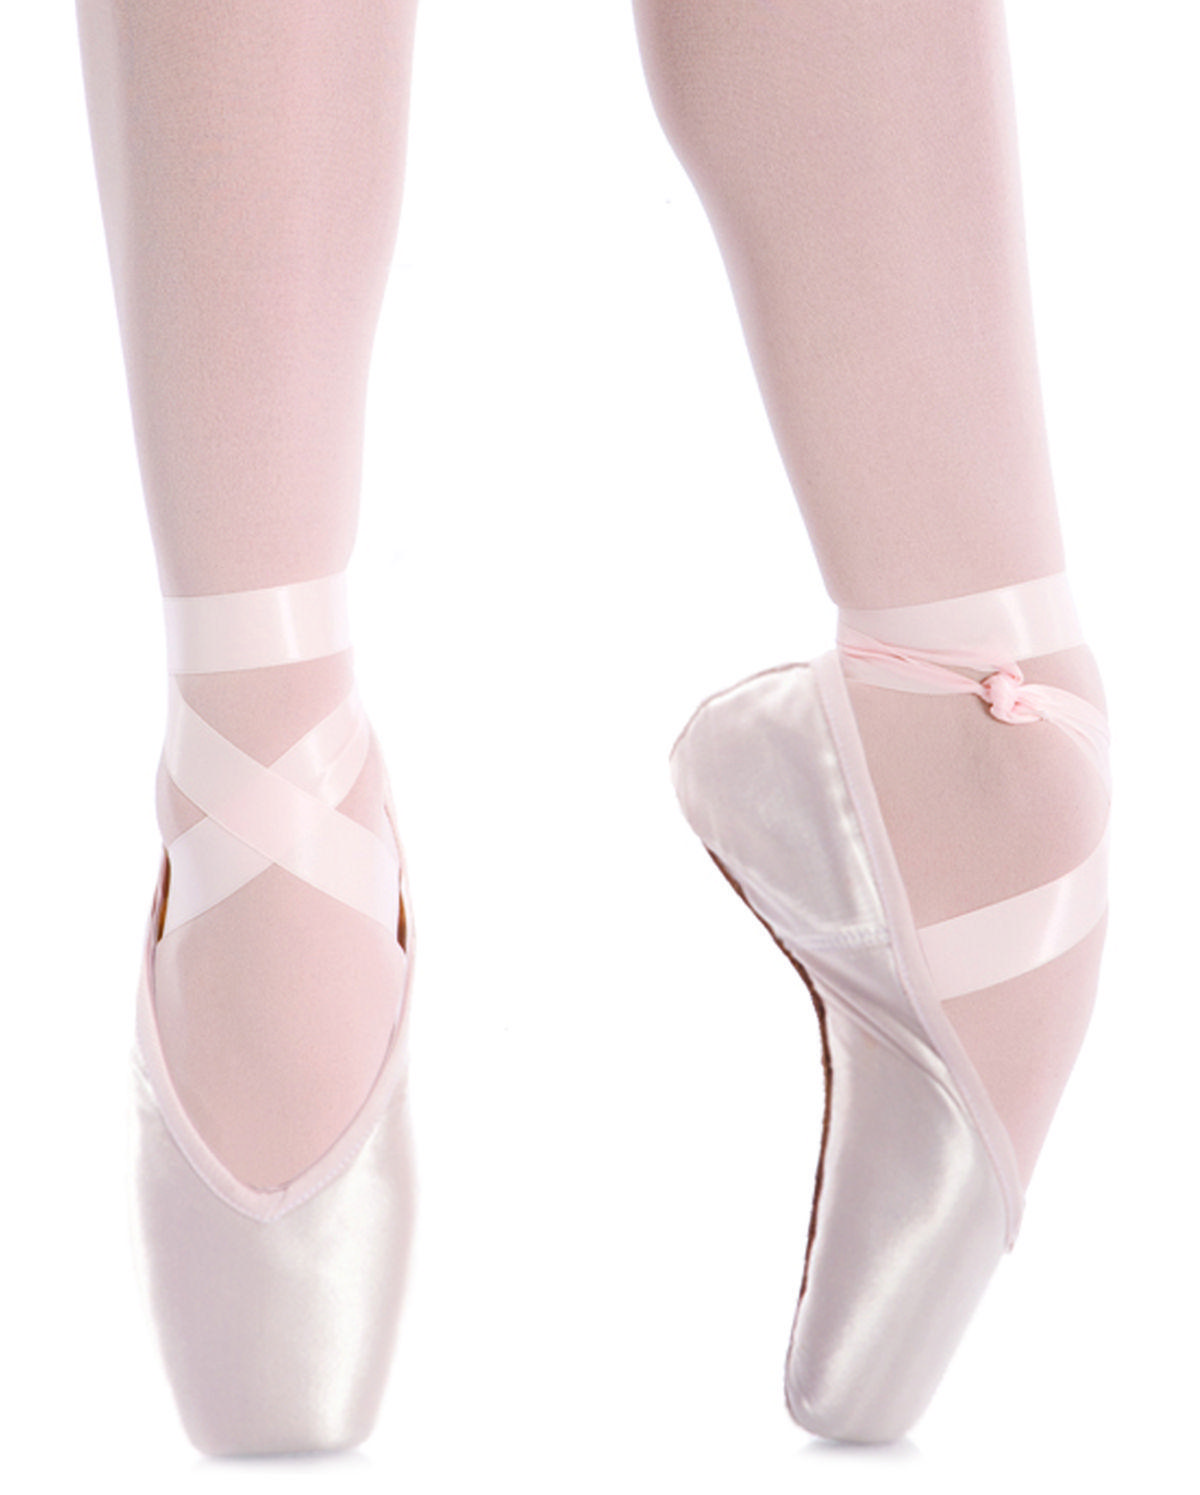 Pointe Shoes Wallpapers - Wallpaper Cave